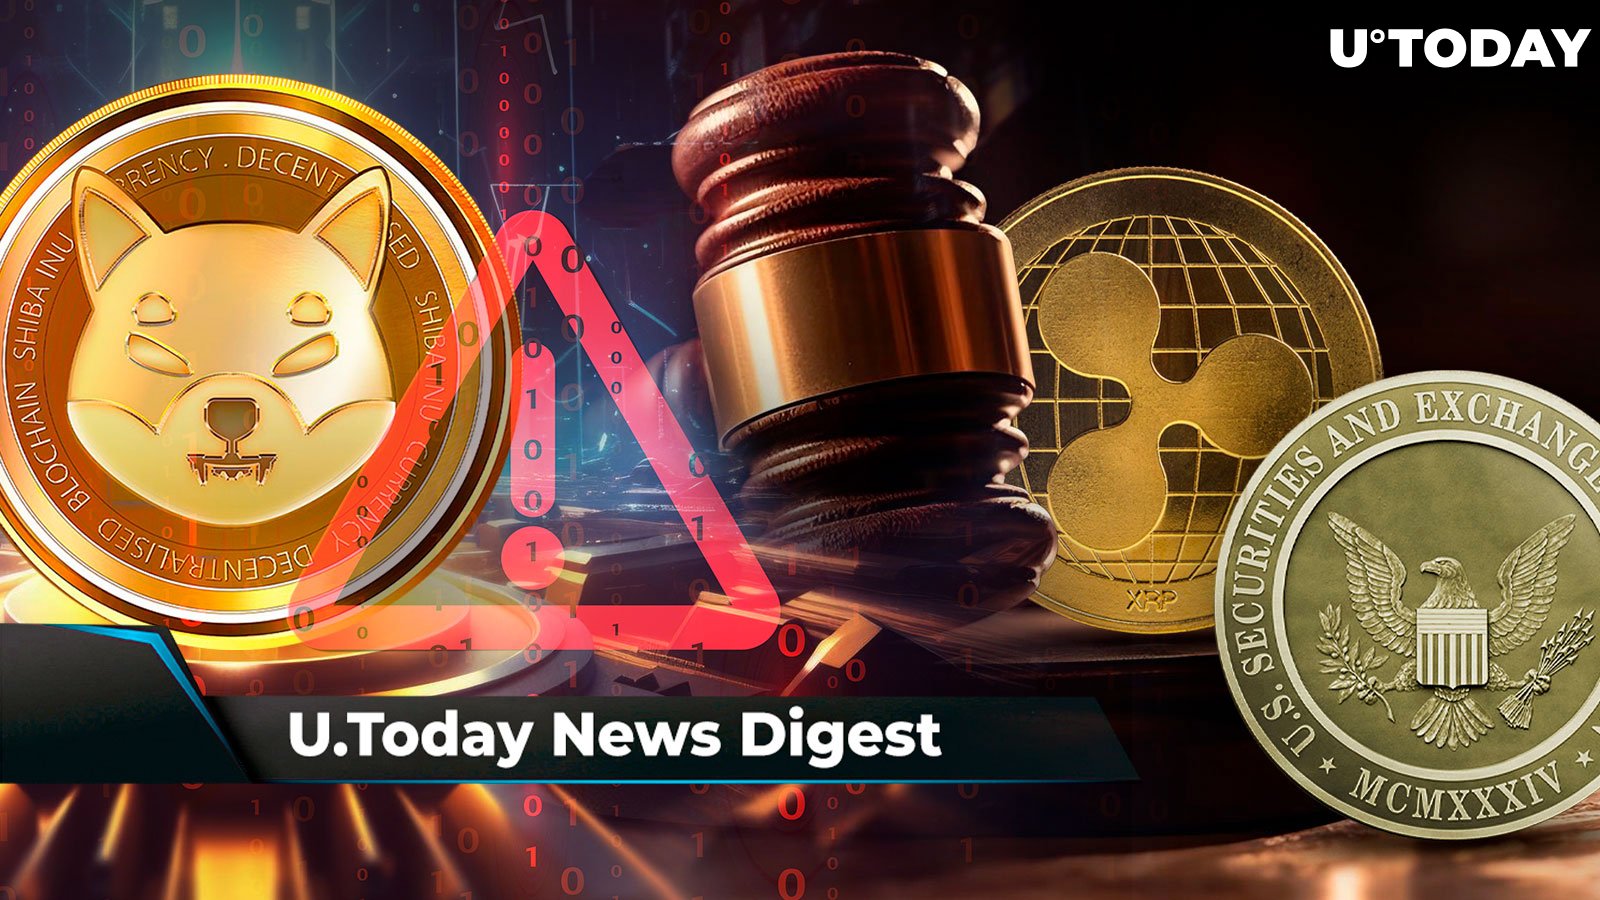 SHIB Holders Warned About New Scam, CZ Supports Michael Saylor on His Bitcoin Strategy, Judge Sets Schedule for Ripple-SEC Remedy Discovery: Crypto News Digest by U.Today